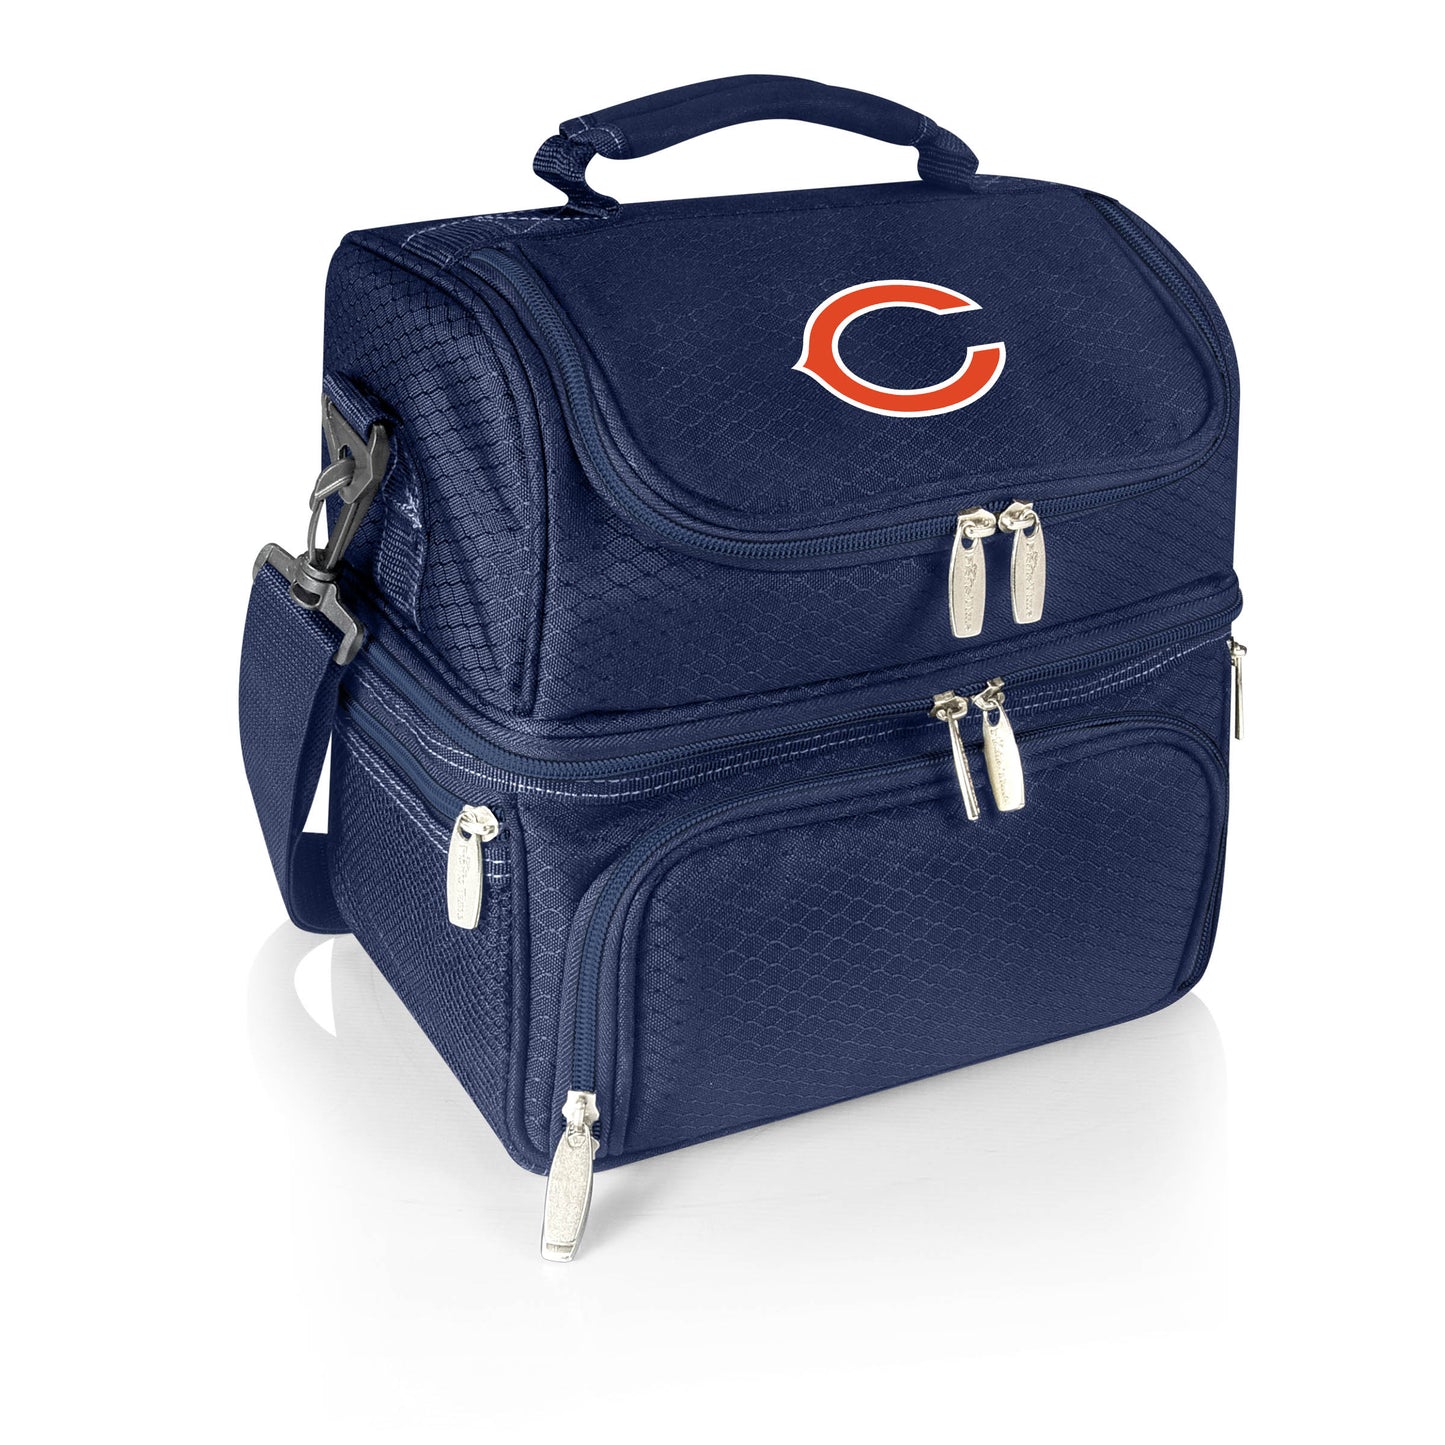 Chicago Bears - Pranzo Lunch Cooler Bag